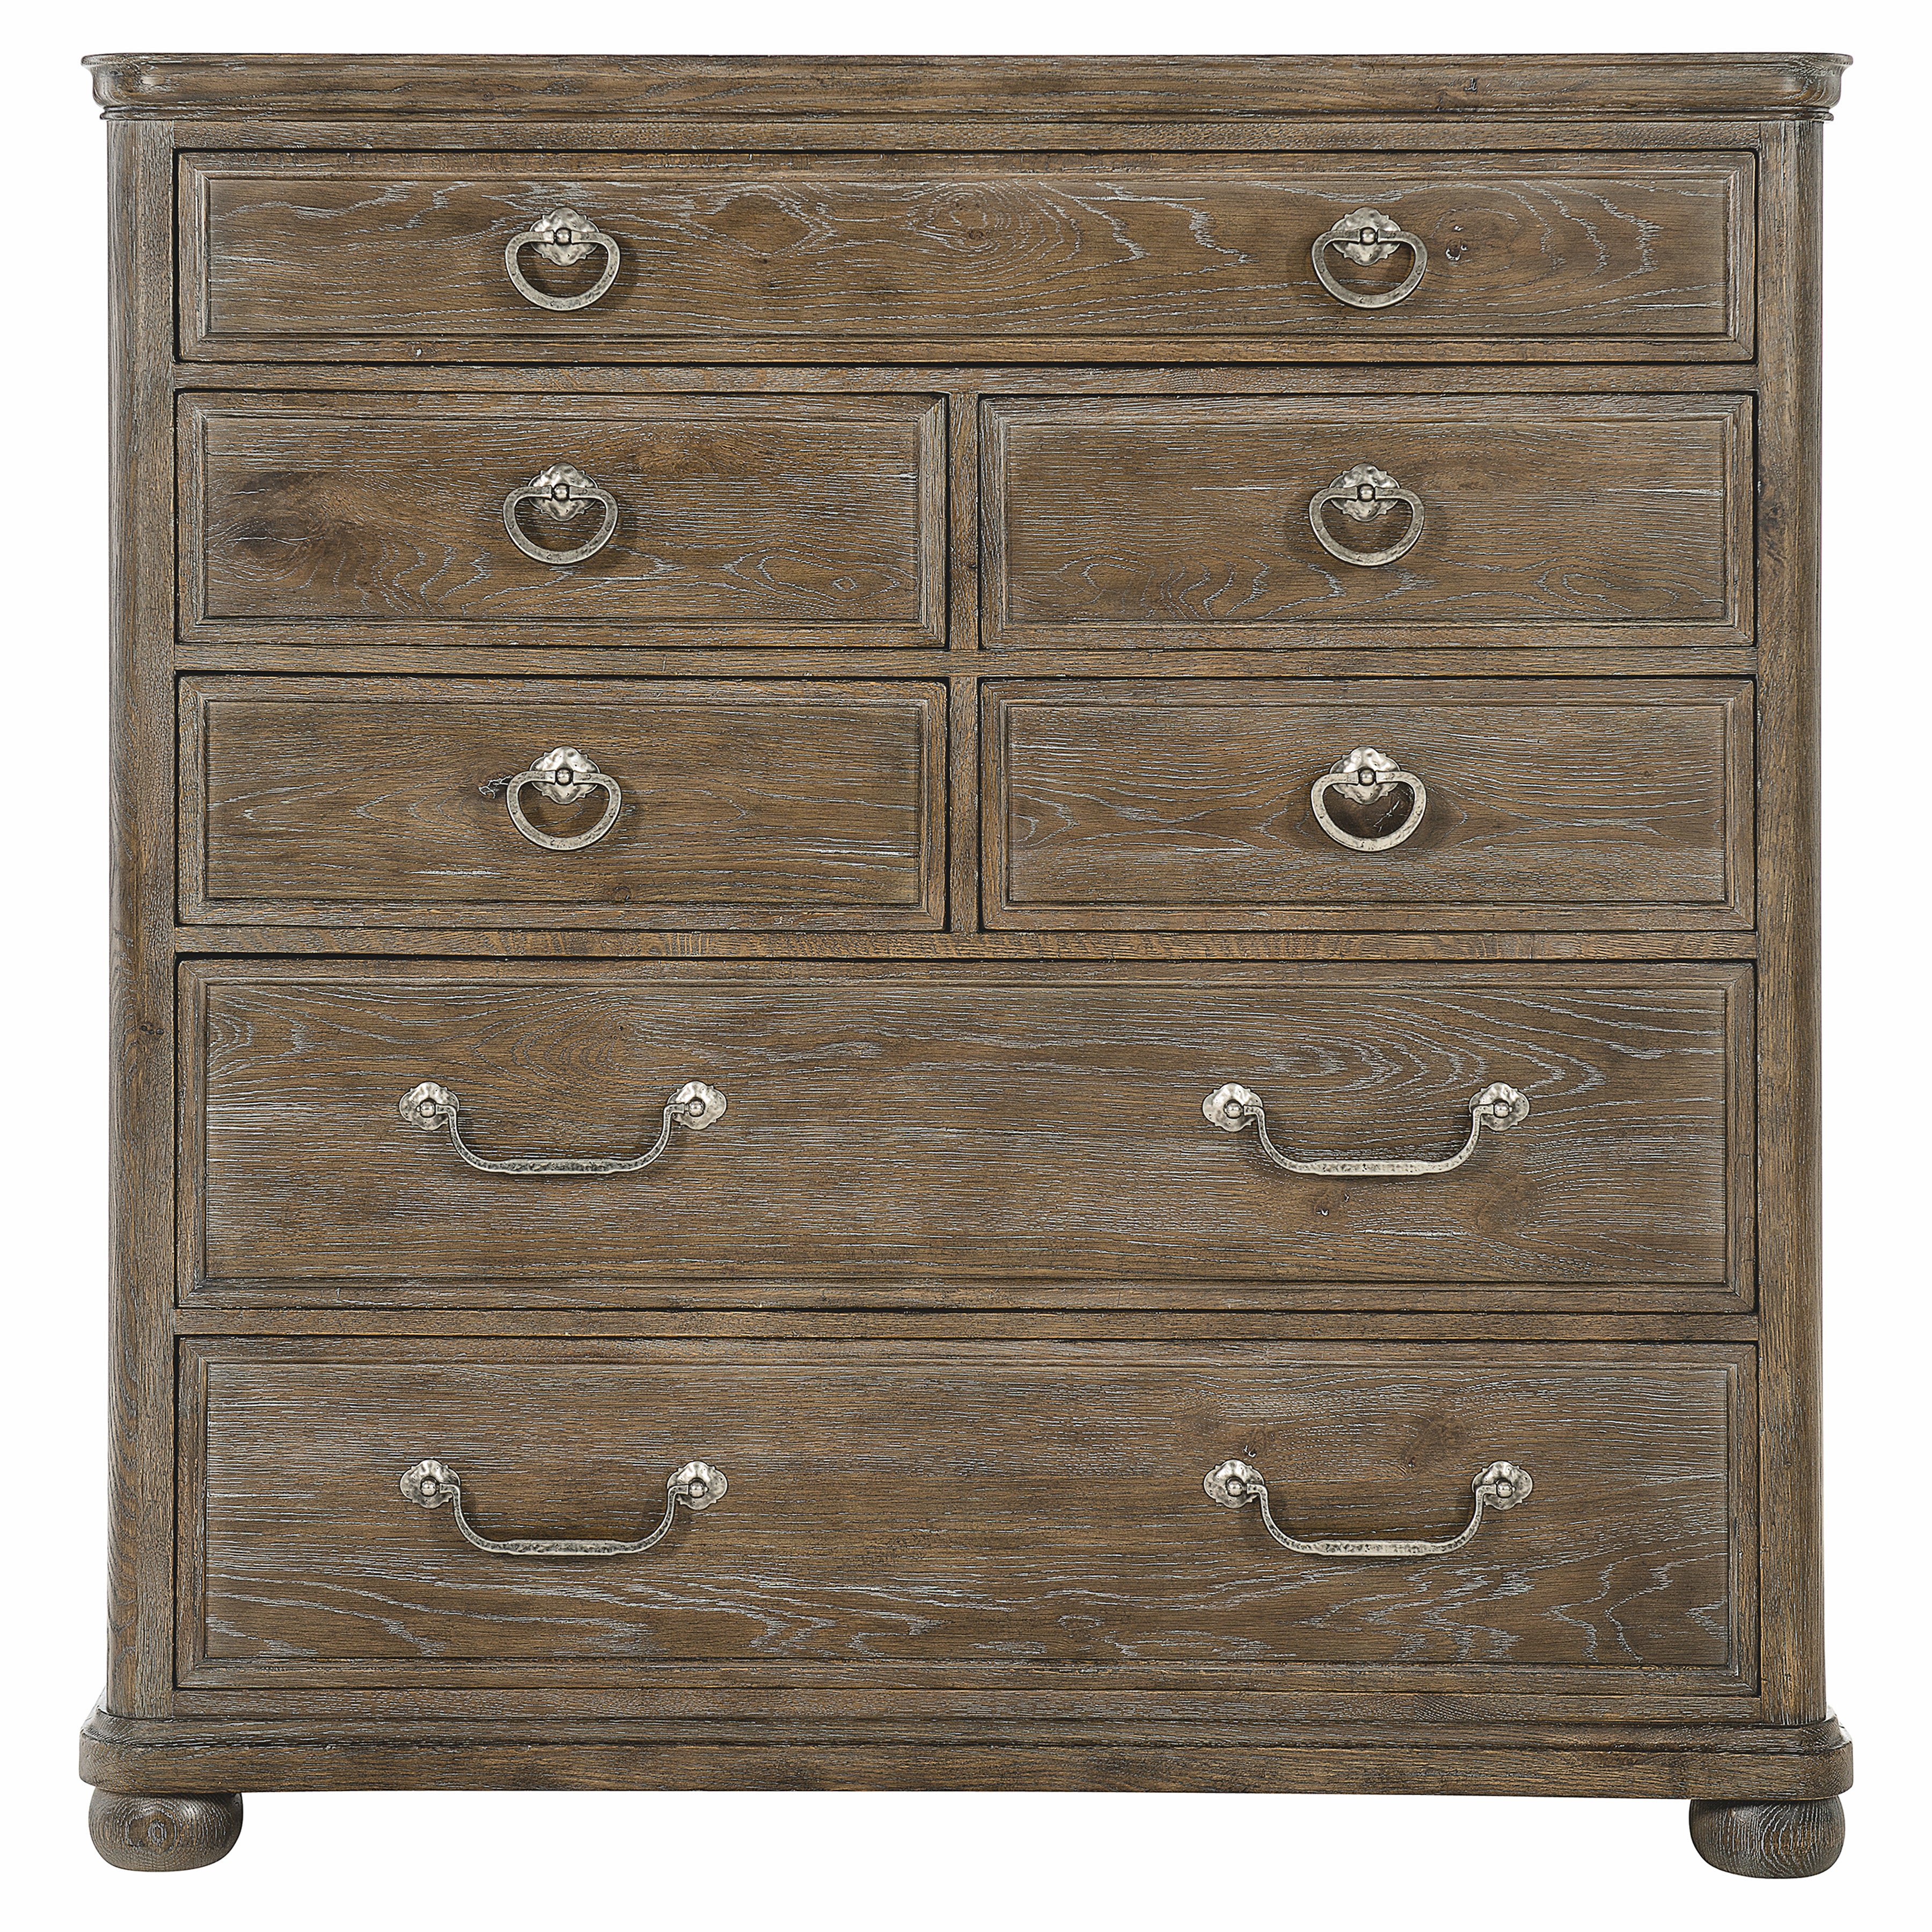 Rustic Patina Drawer Chest in Peppercorn Finish